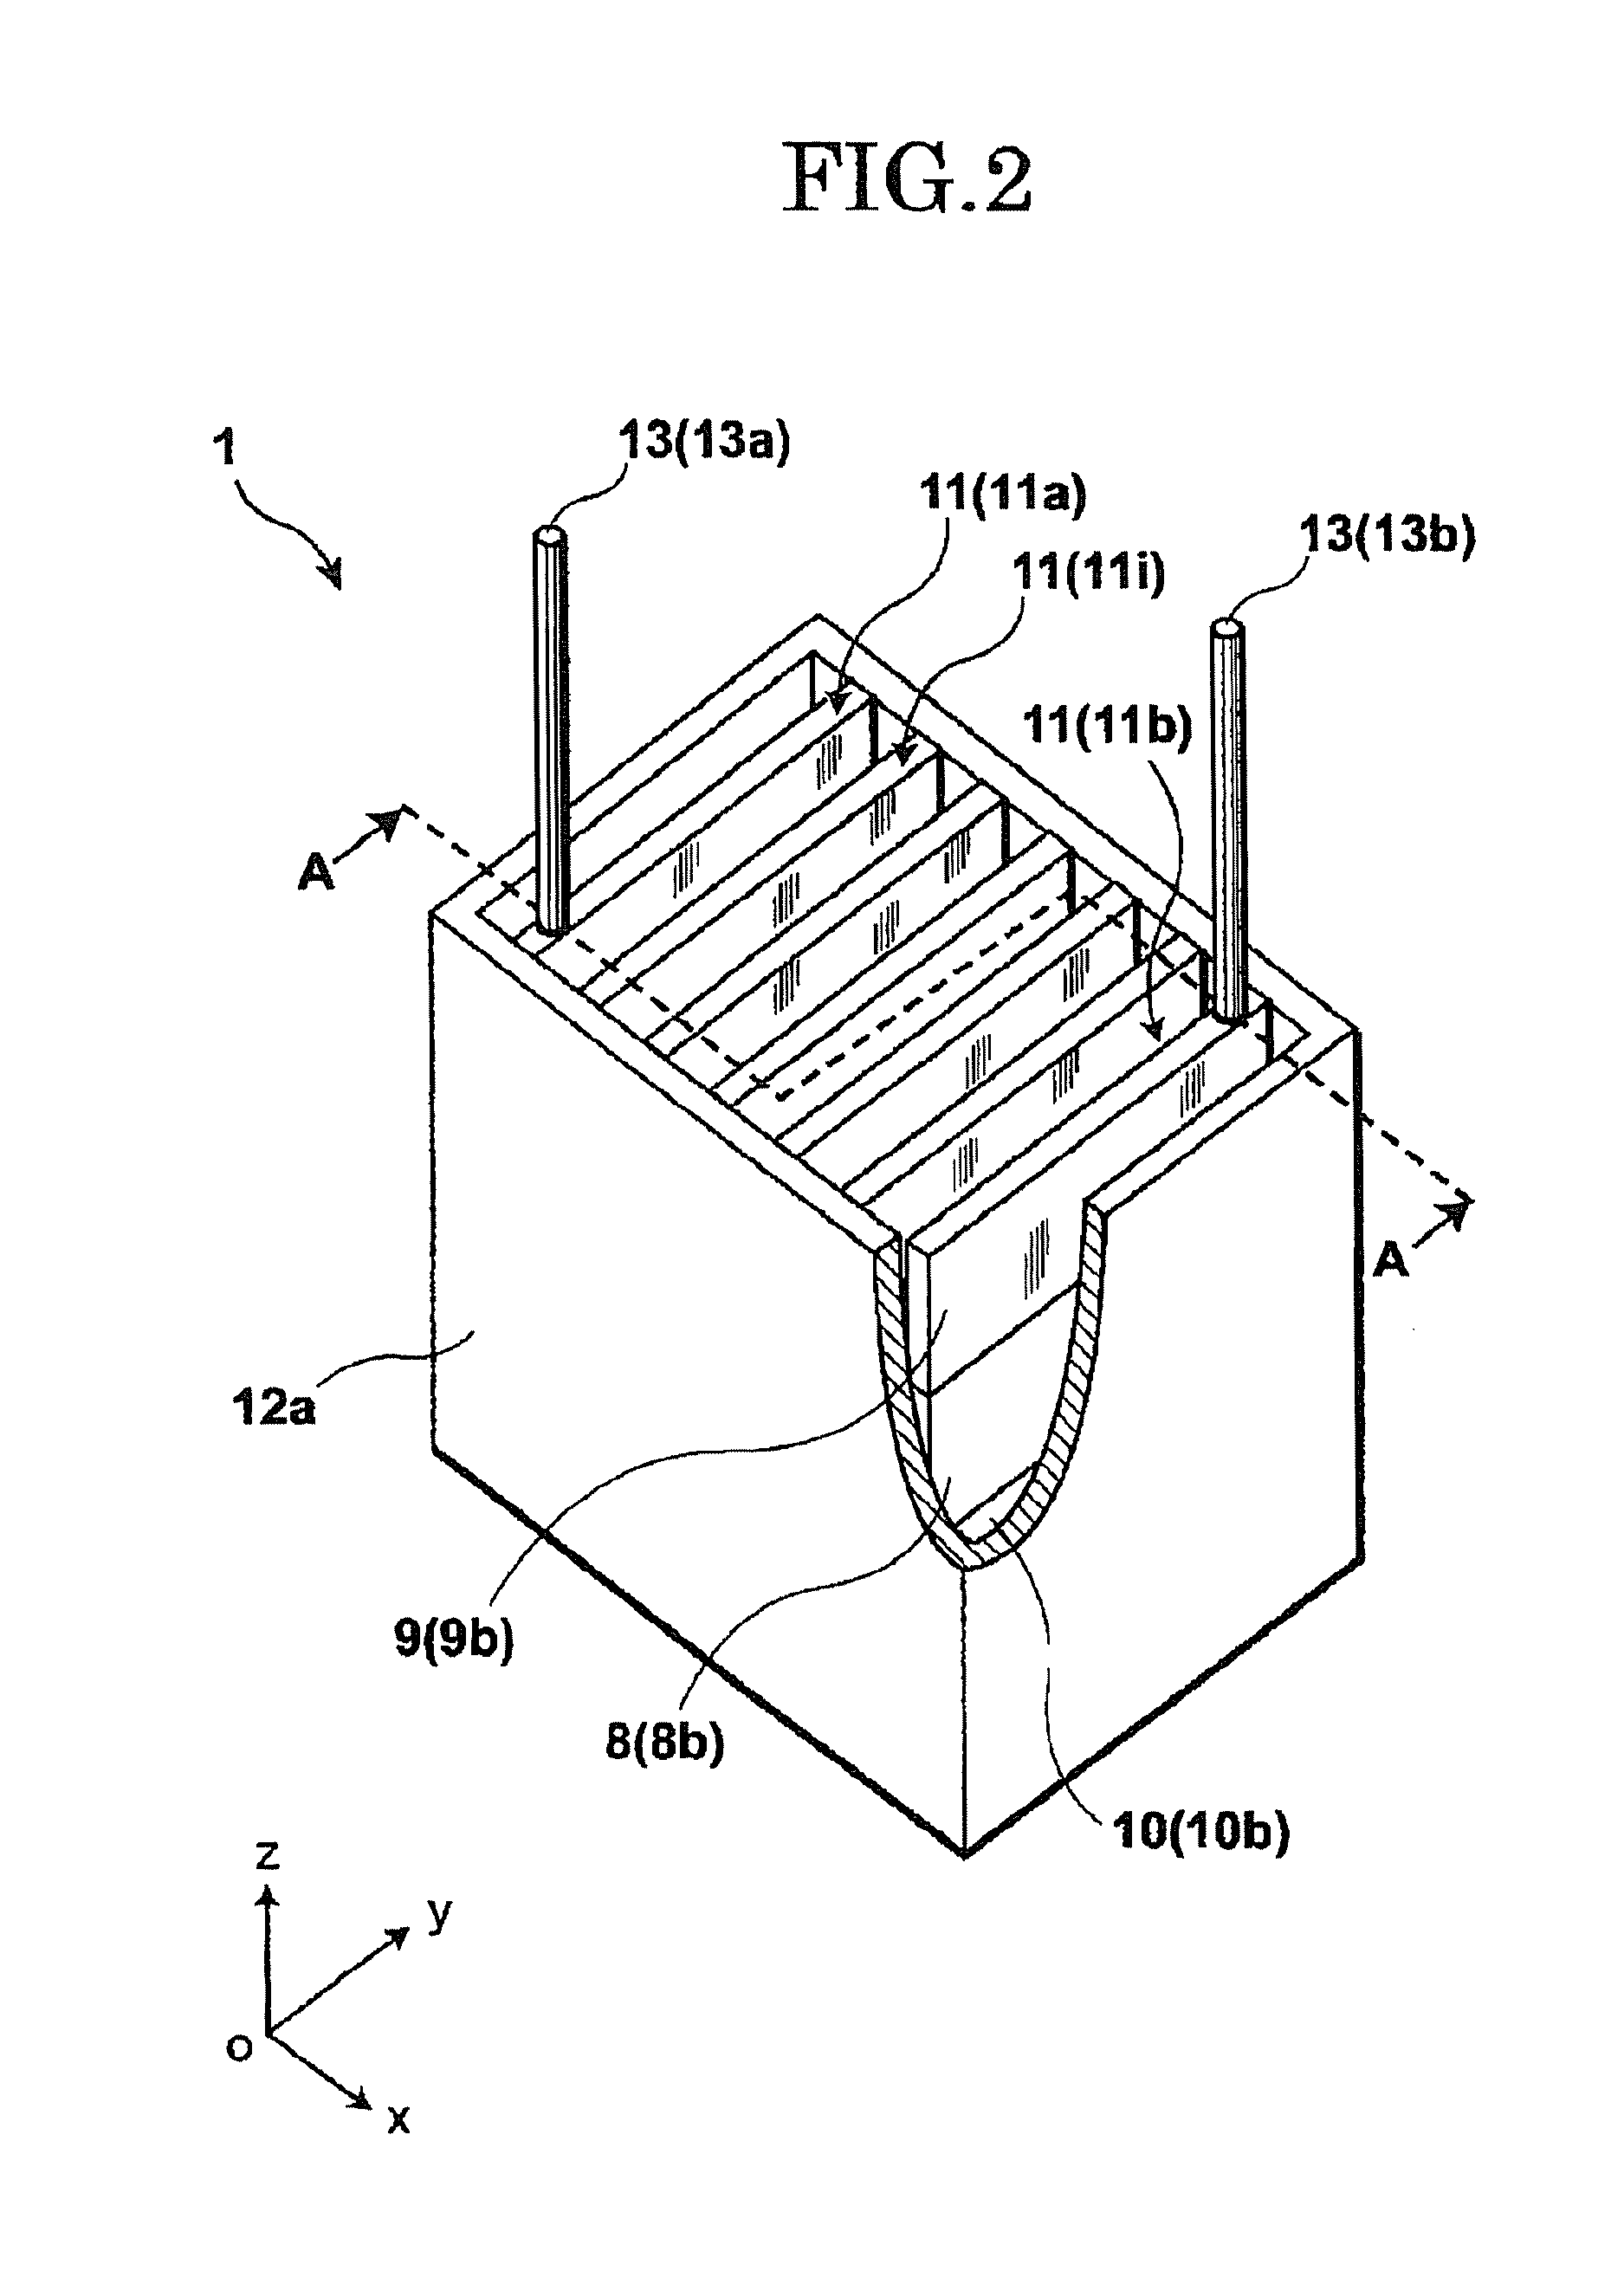 Electrolysis system and method